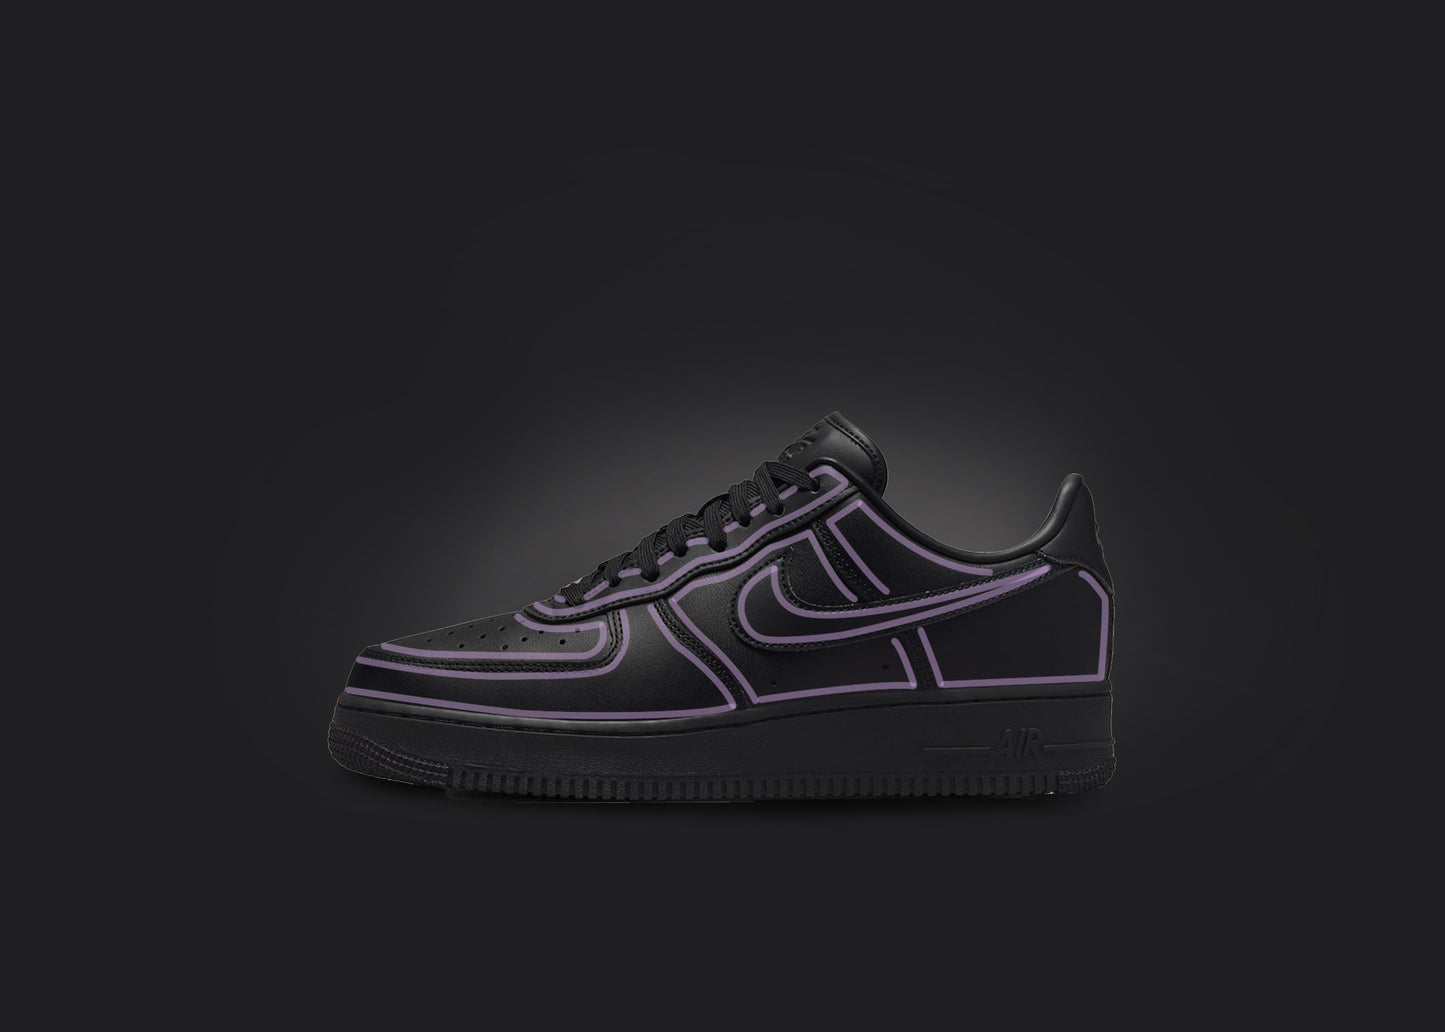 The image is featuring a custom black Air force 1 sneaker on a blank black background. The black nike sneaker has a Pink cartoon outline design all over the sneaker. 